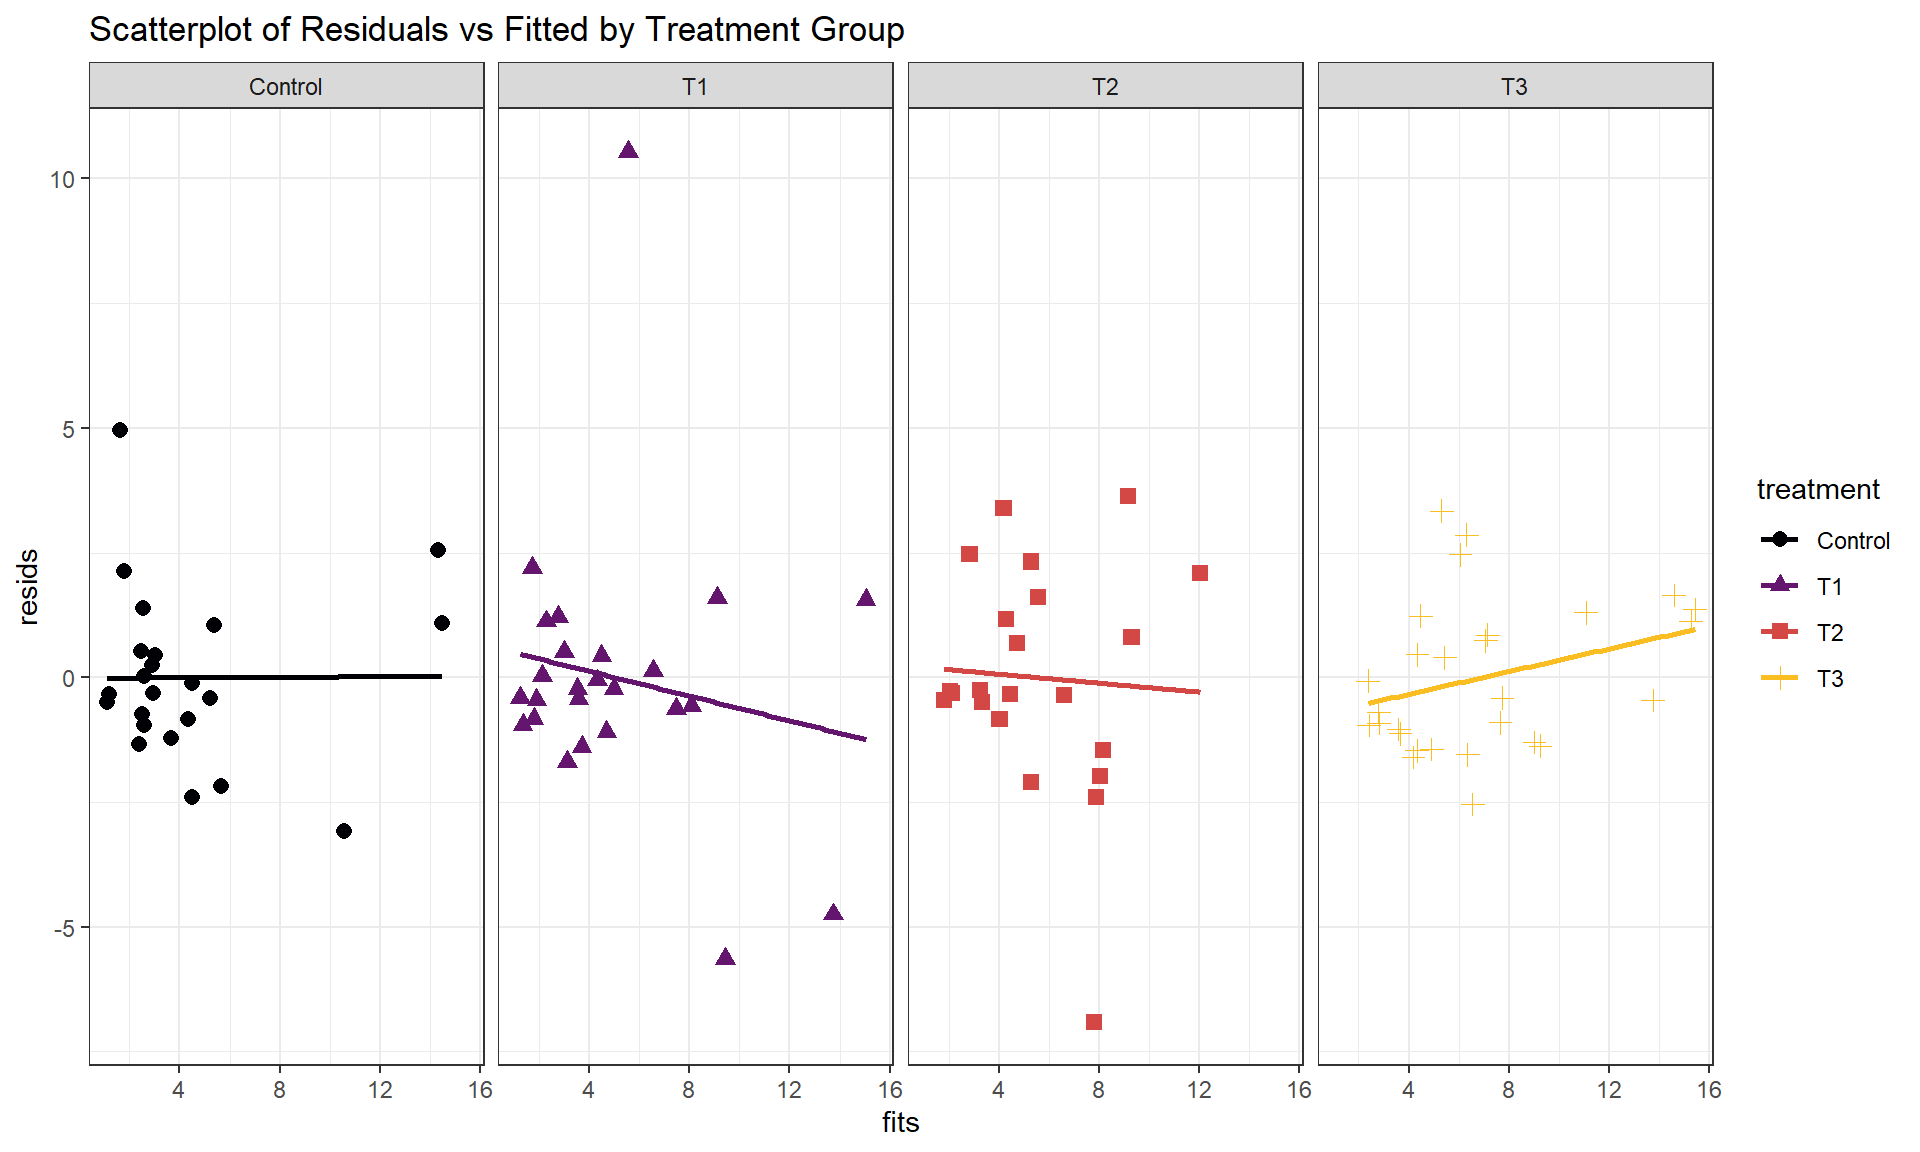 Faceted scatterplot of residuals versus fitted values by treatment group from the additive decibel tolerance model.